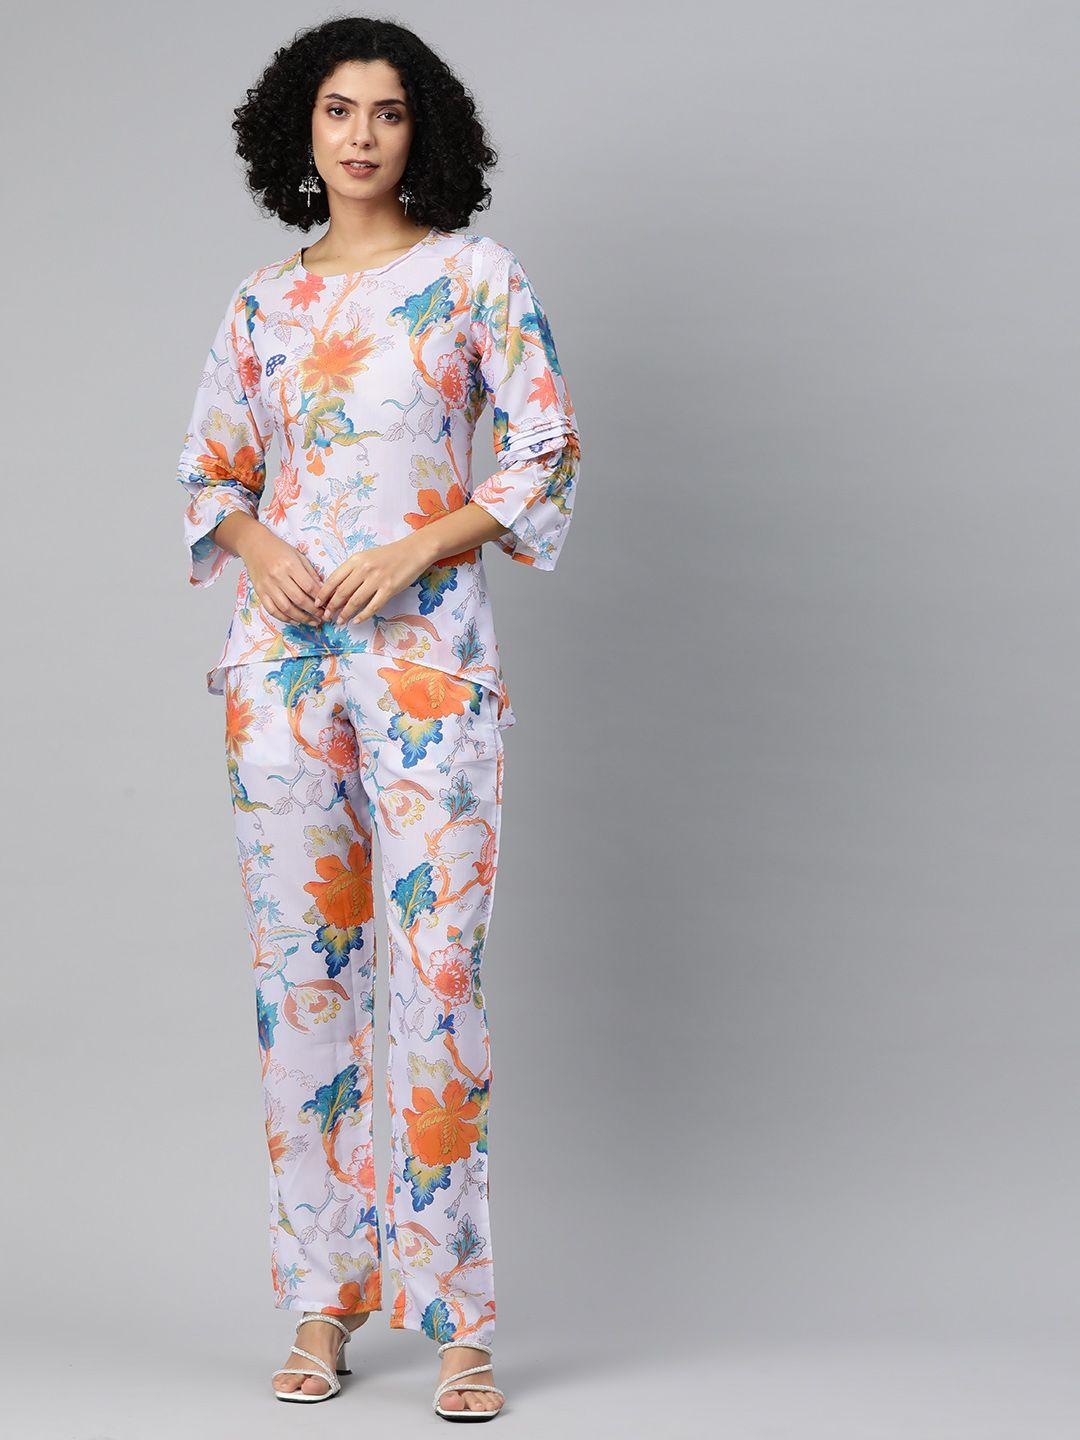 readiprint fashions floral printed co-ords